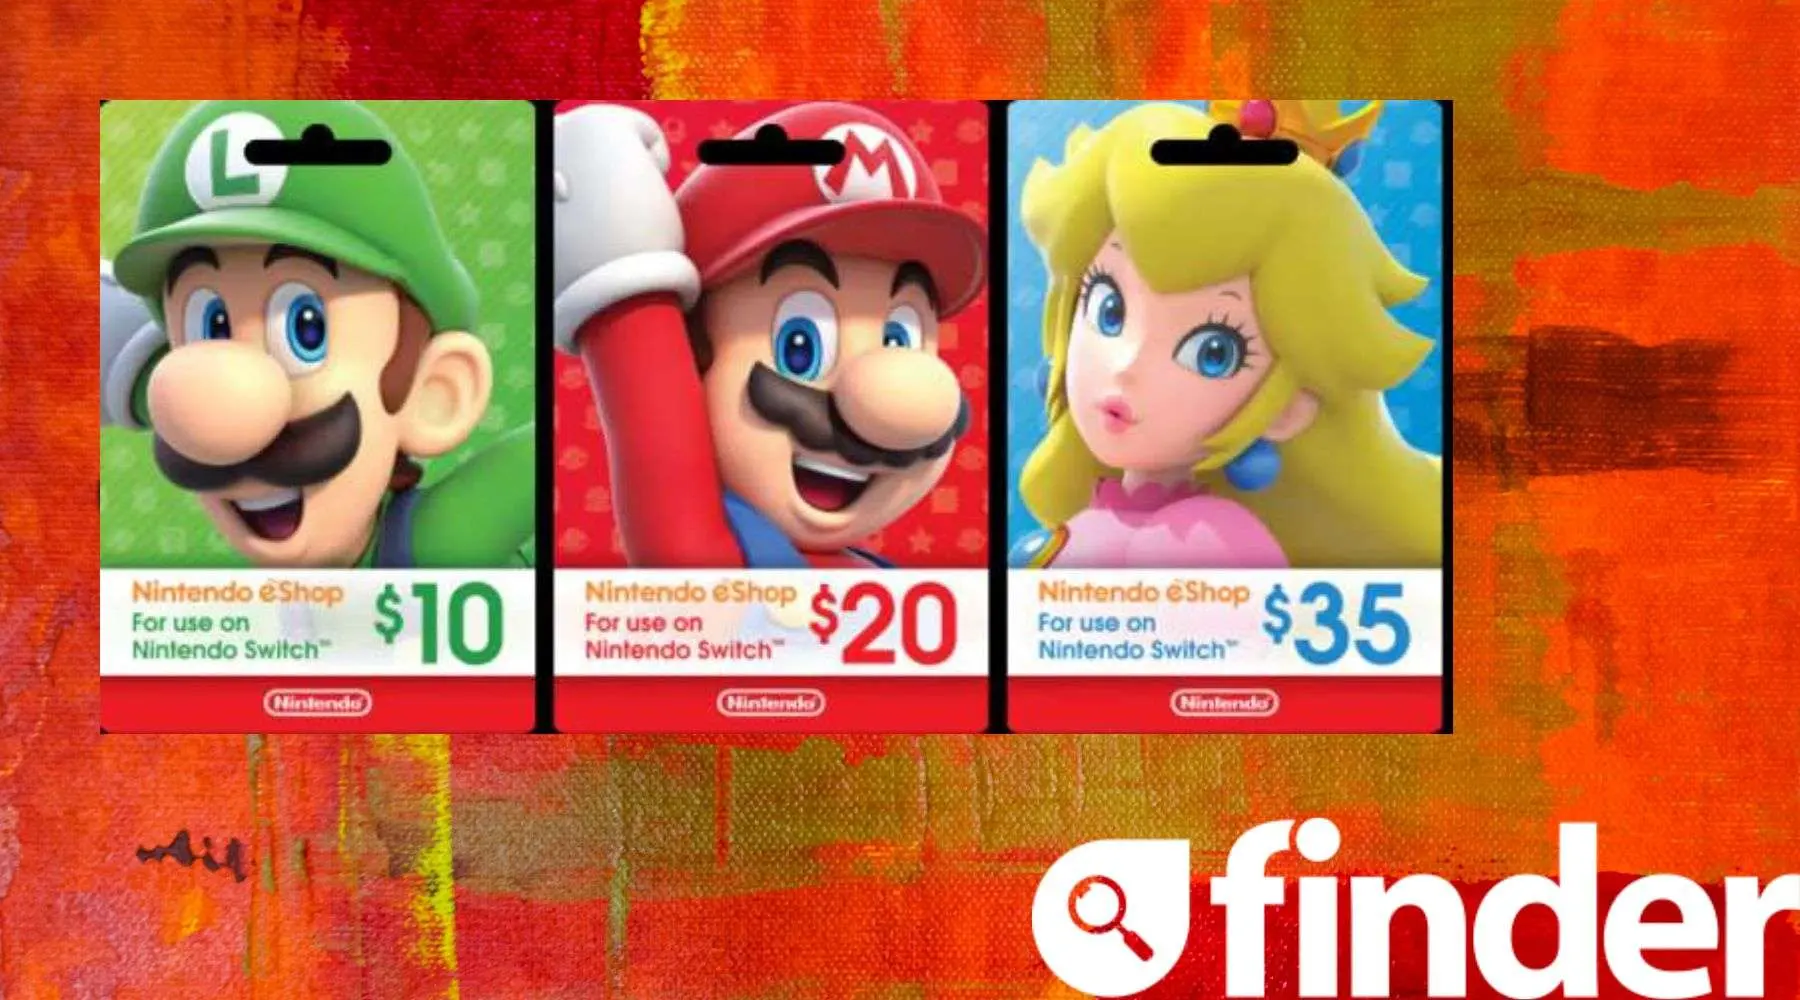 Nintendo eShop gift cards are 10 percent off for Cyber Monday